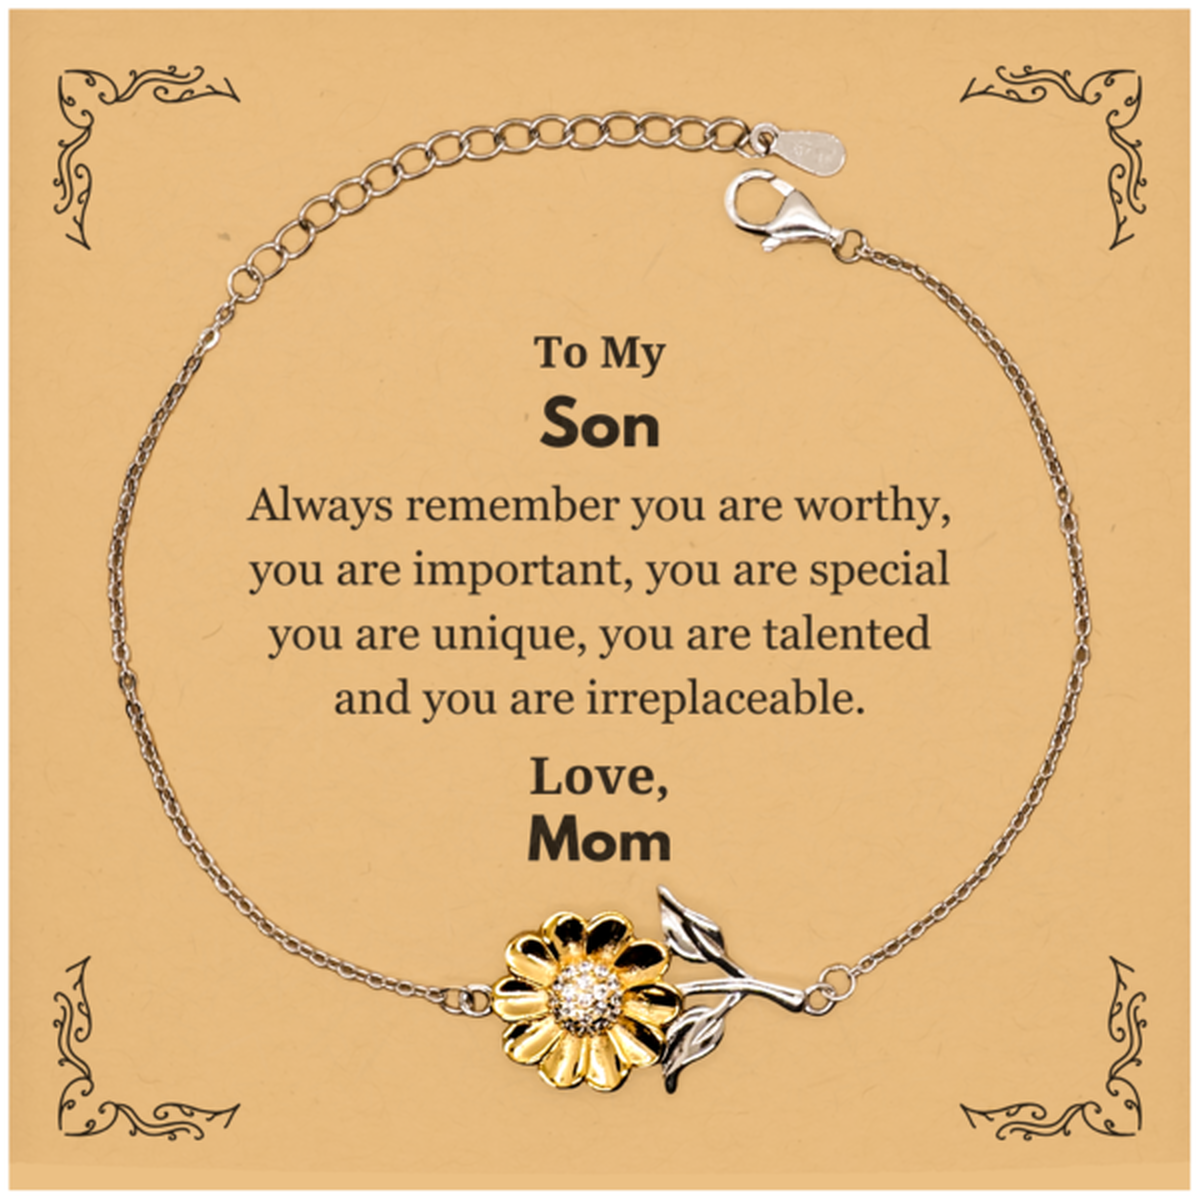 Son Birthday Gifts from Mom, Inspirational Sunflower Bracelet for Son Christmas Graduation Gifts for Son Always remember you are worthy, you are important. Love, Mom